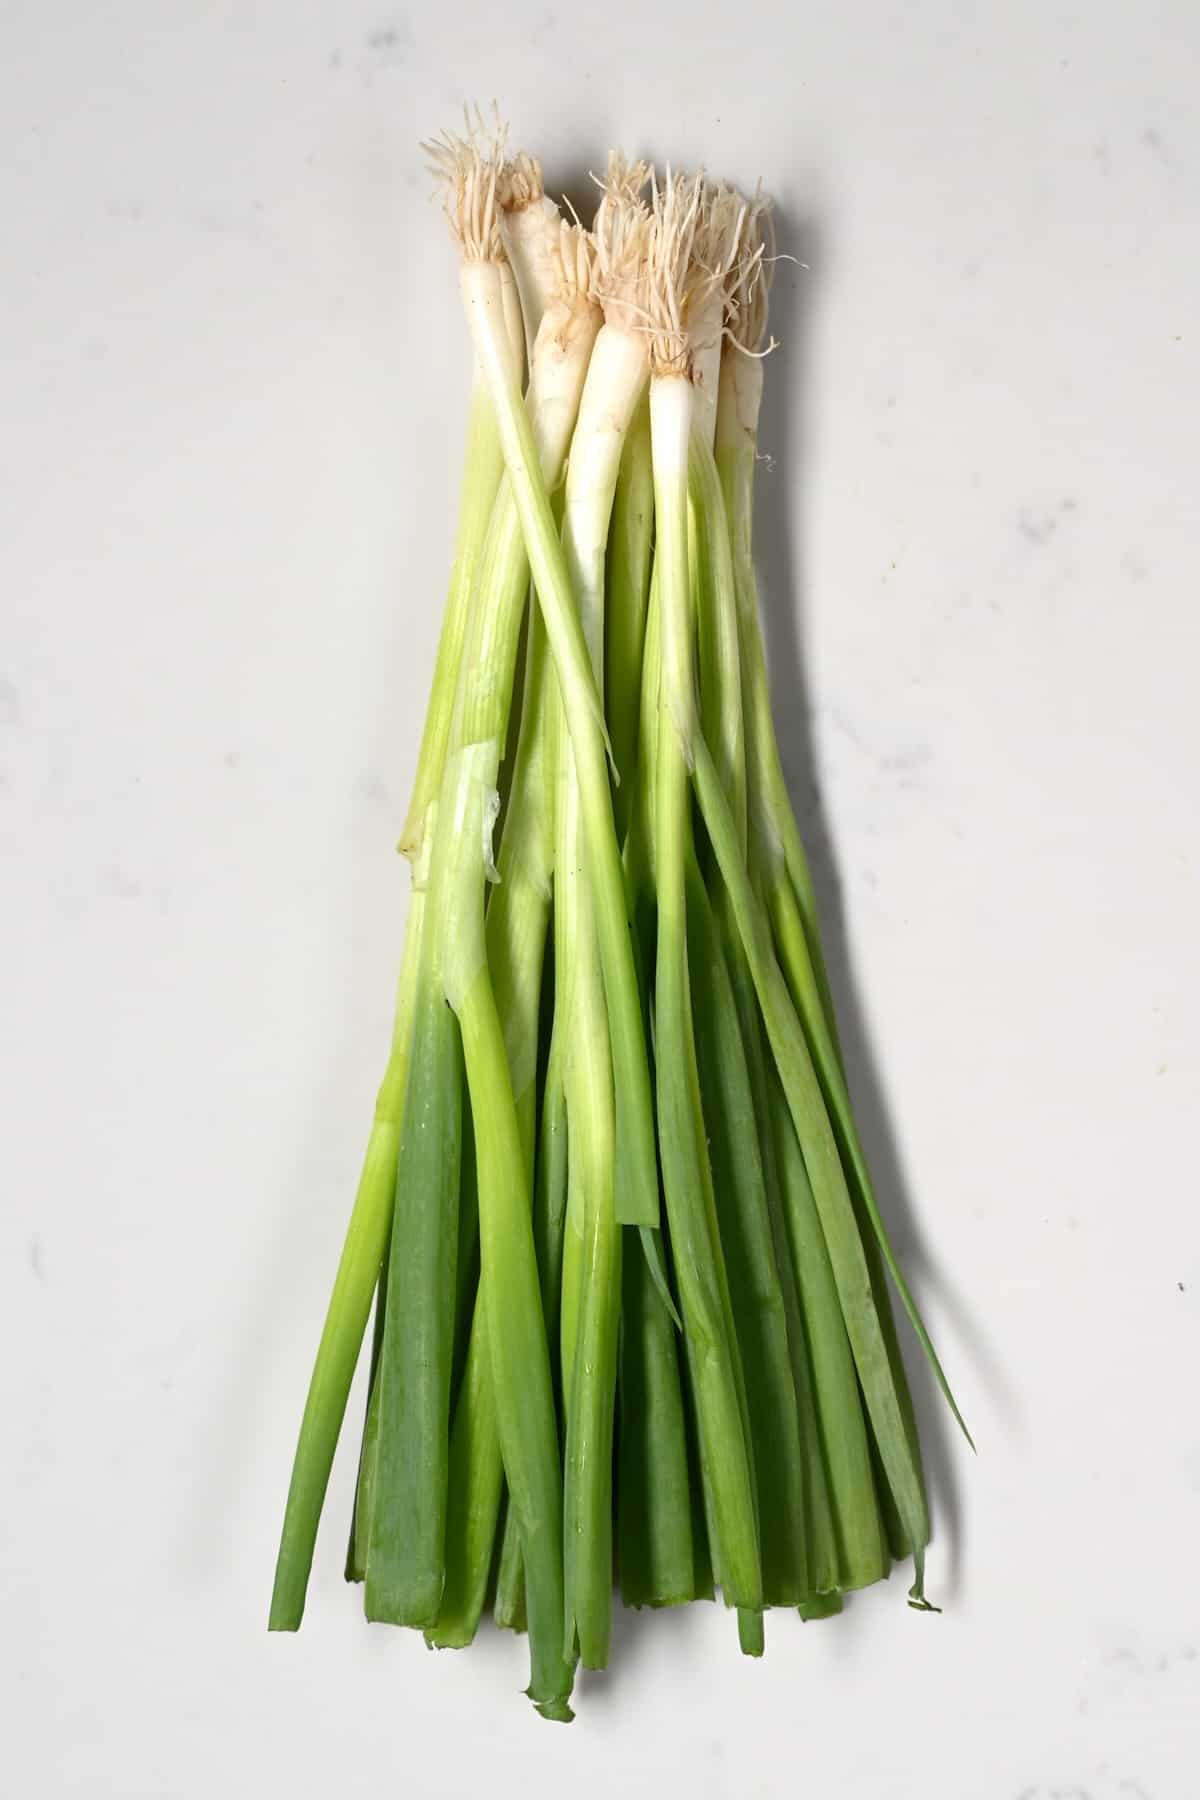 Green onions on a flat surface